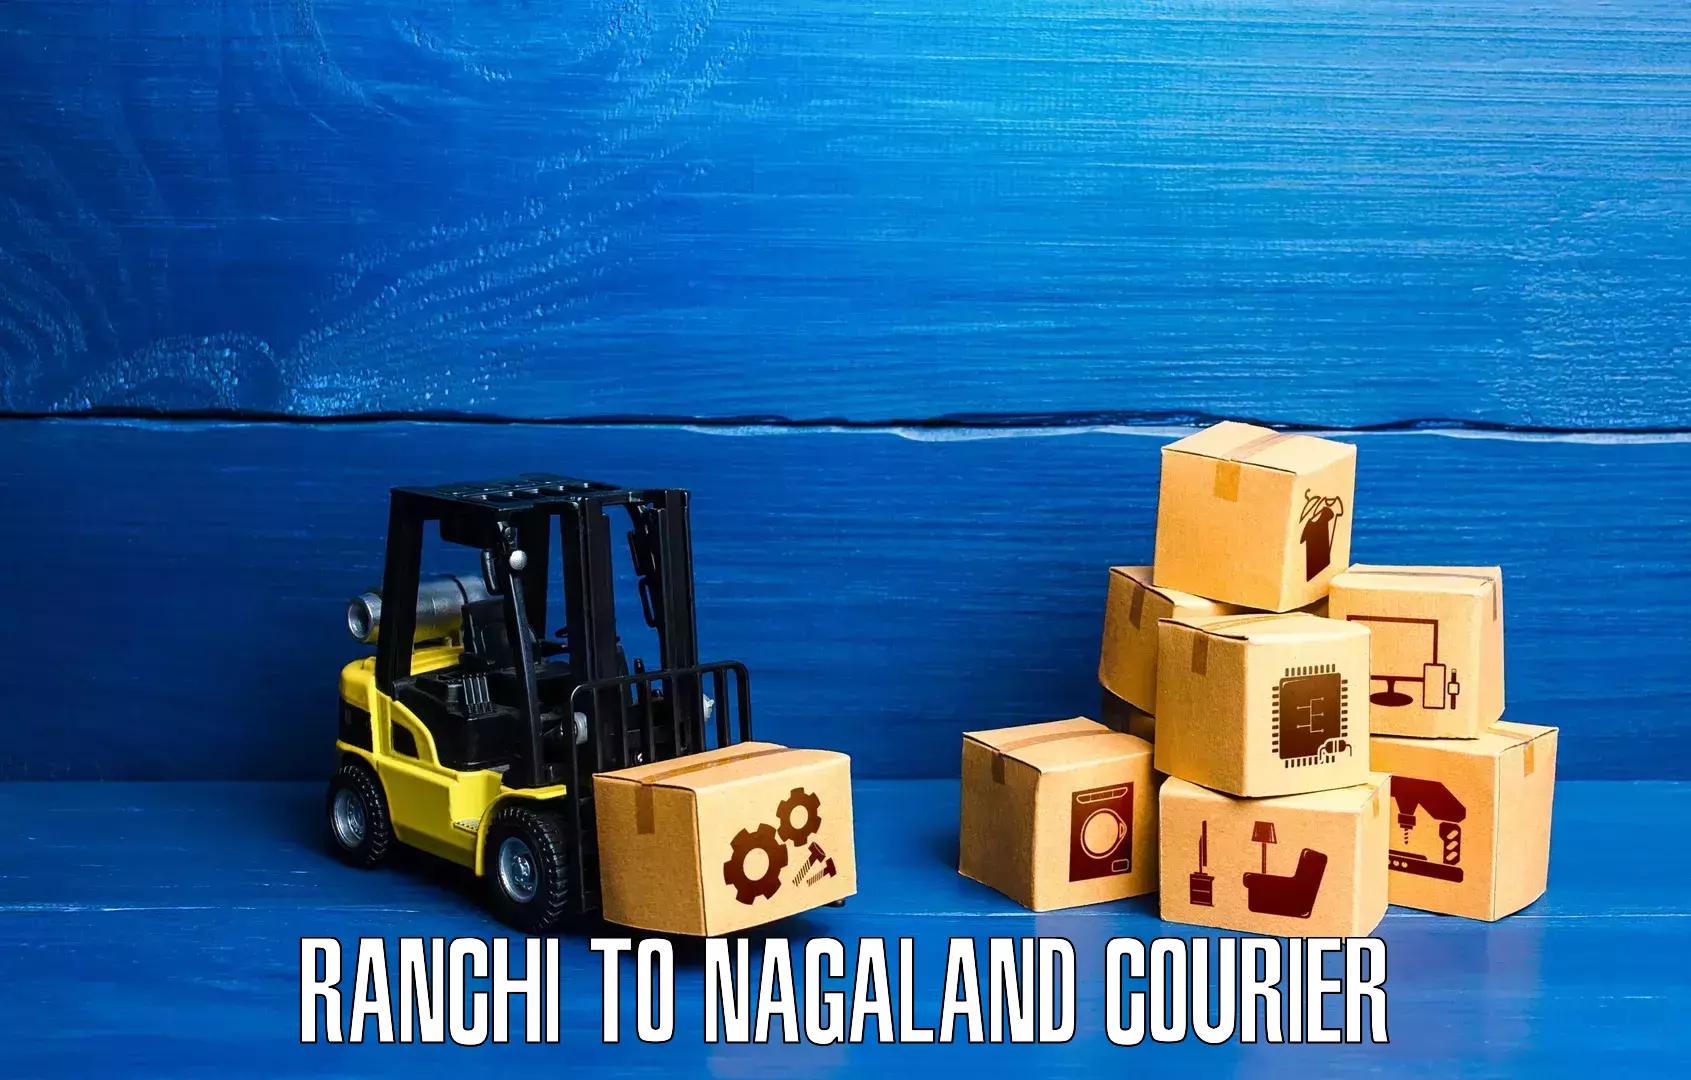 Courier service efficiency Ranchi to Nagaland